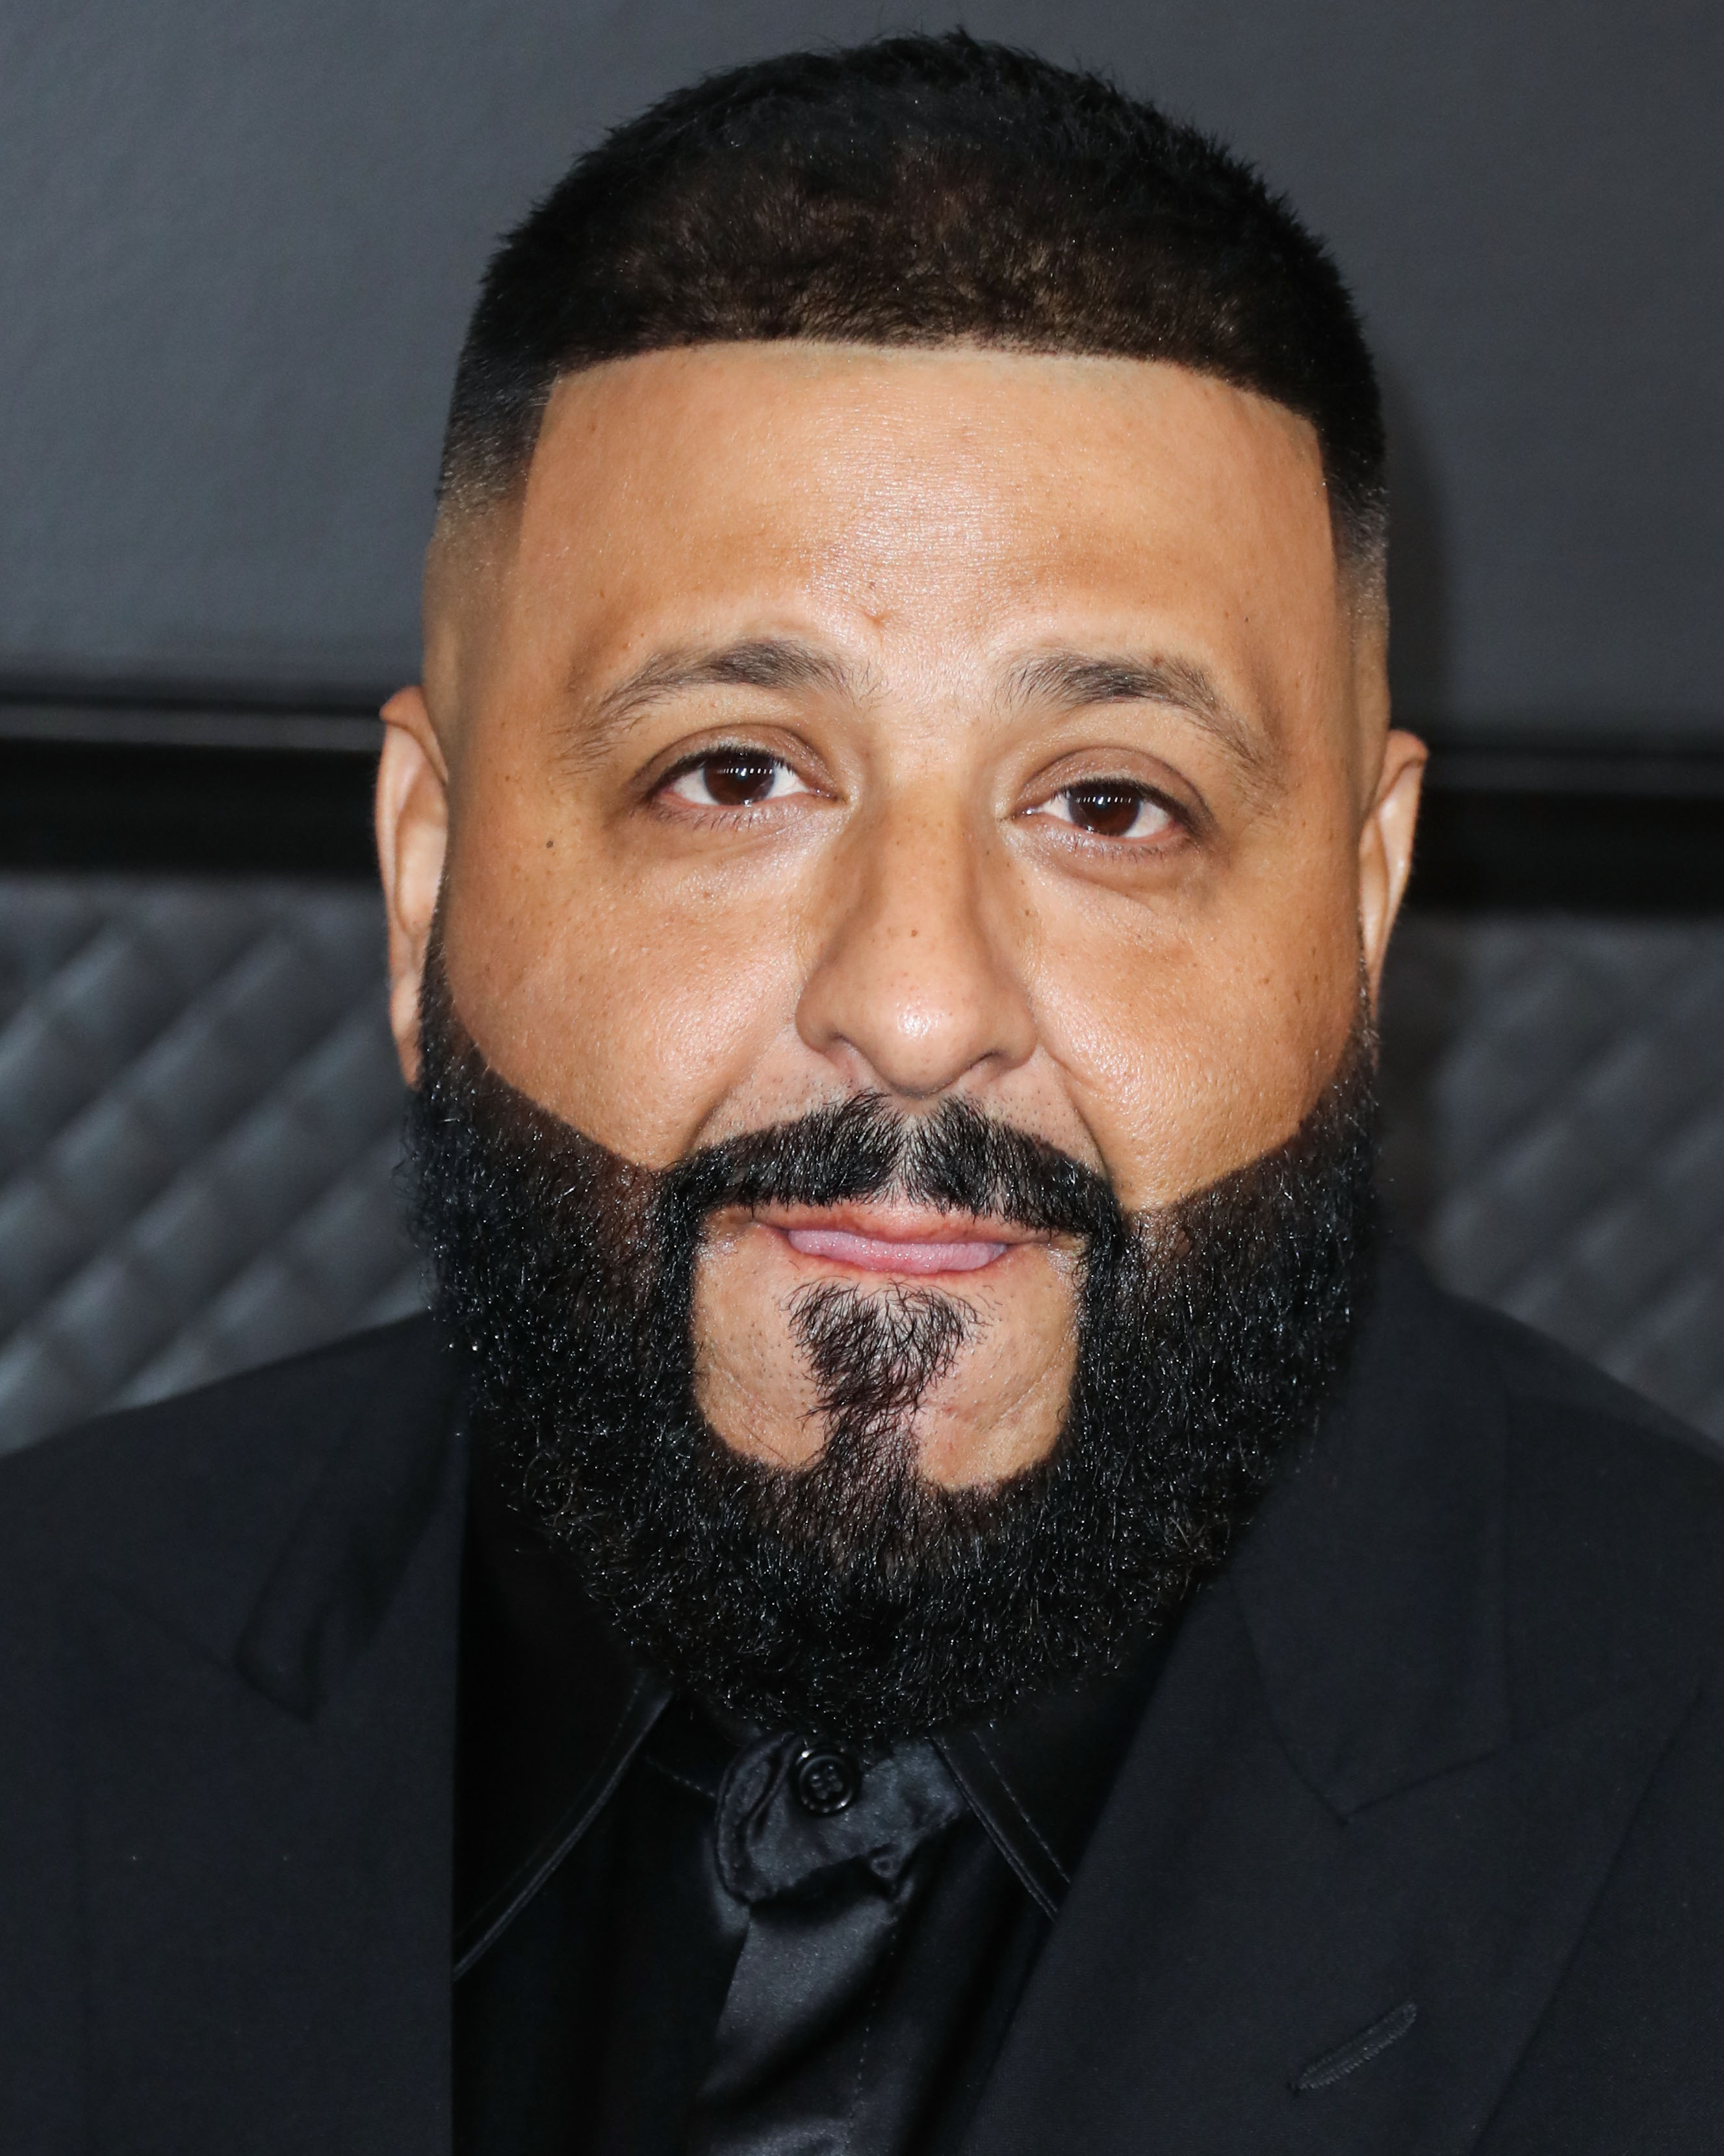 DJ Khaled arrives at the 62nd Annual GRAMMY Awards held at Staples Center on January 26, 2020 in Los Angeles, California, United States.